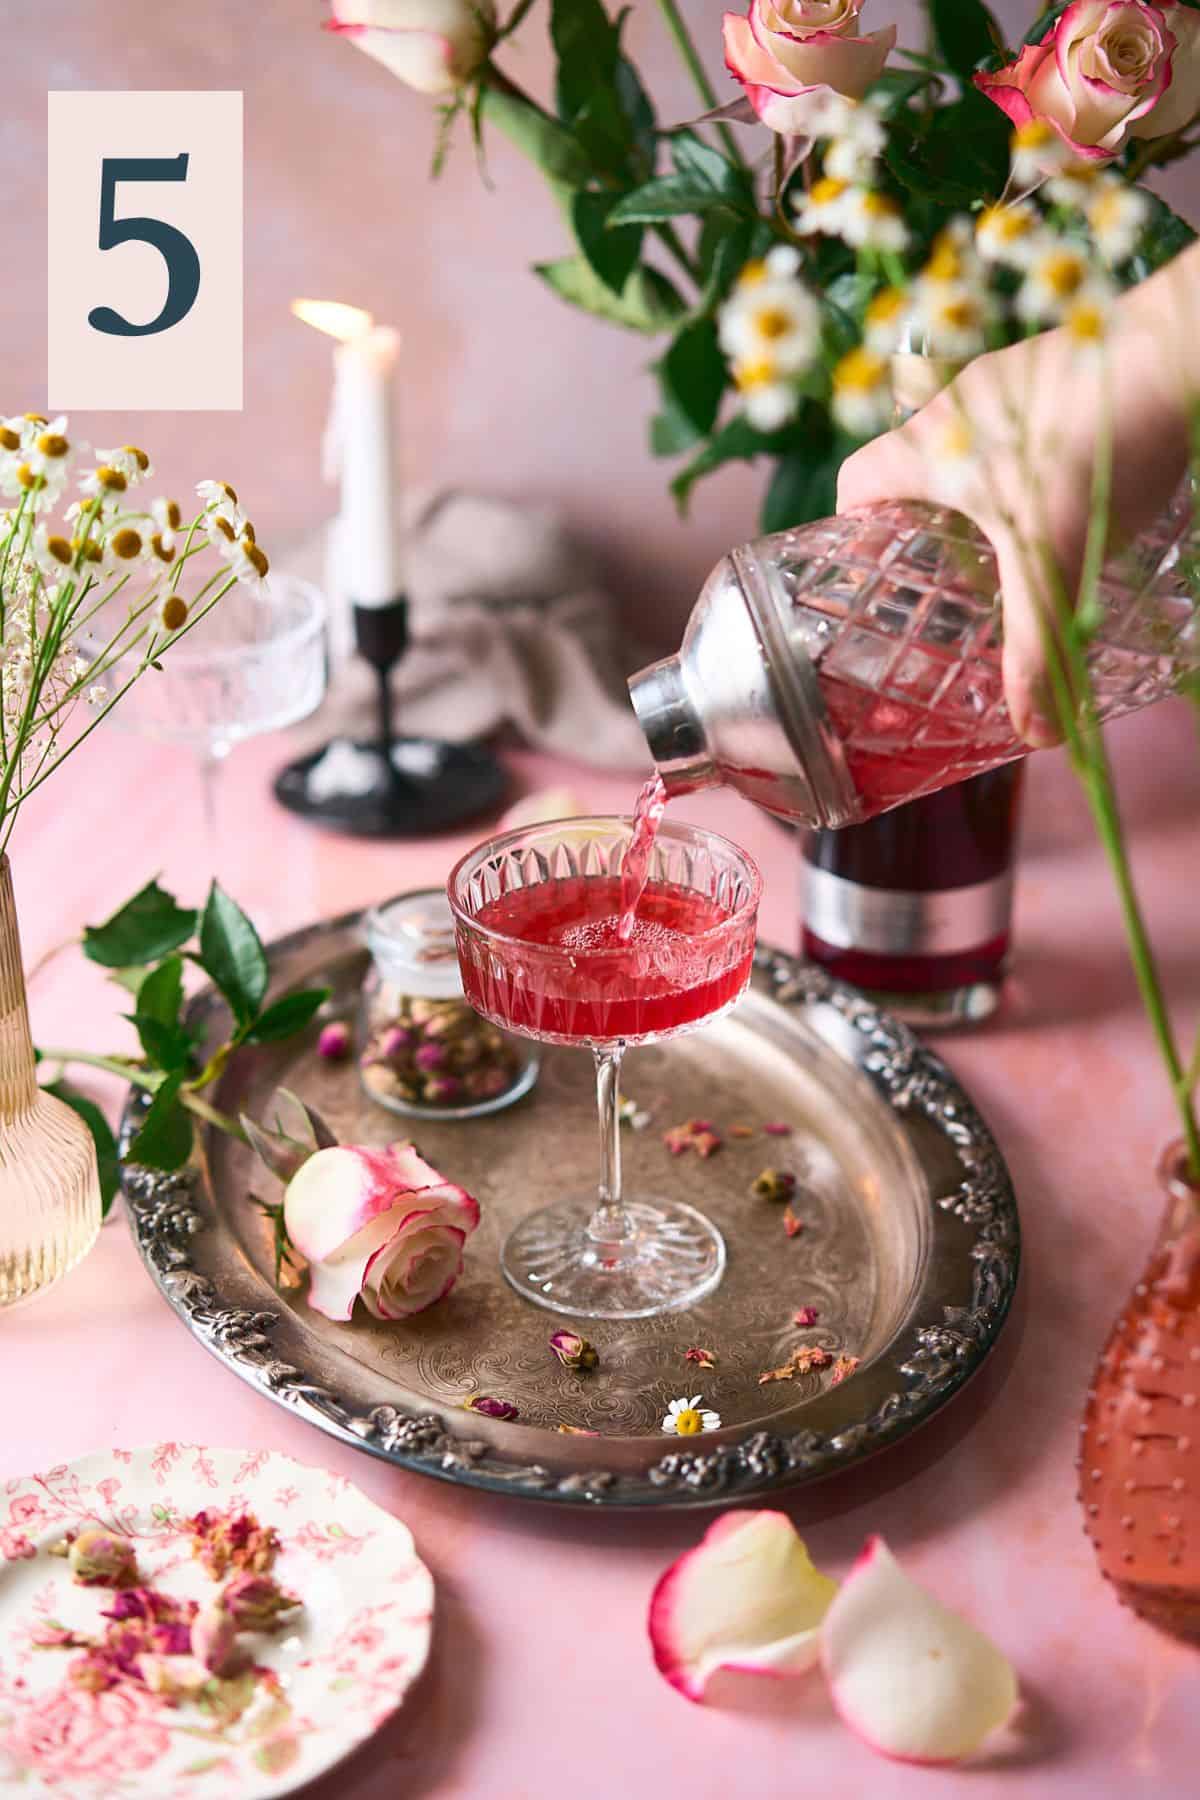 hand pouring a bright pink cocktail from a shaker into a coupe glass with an intricate romantic scene of fresh roses, candles and flowers surrounding it.